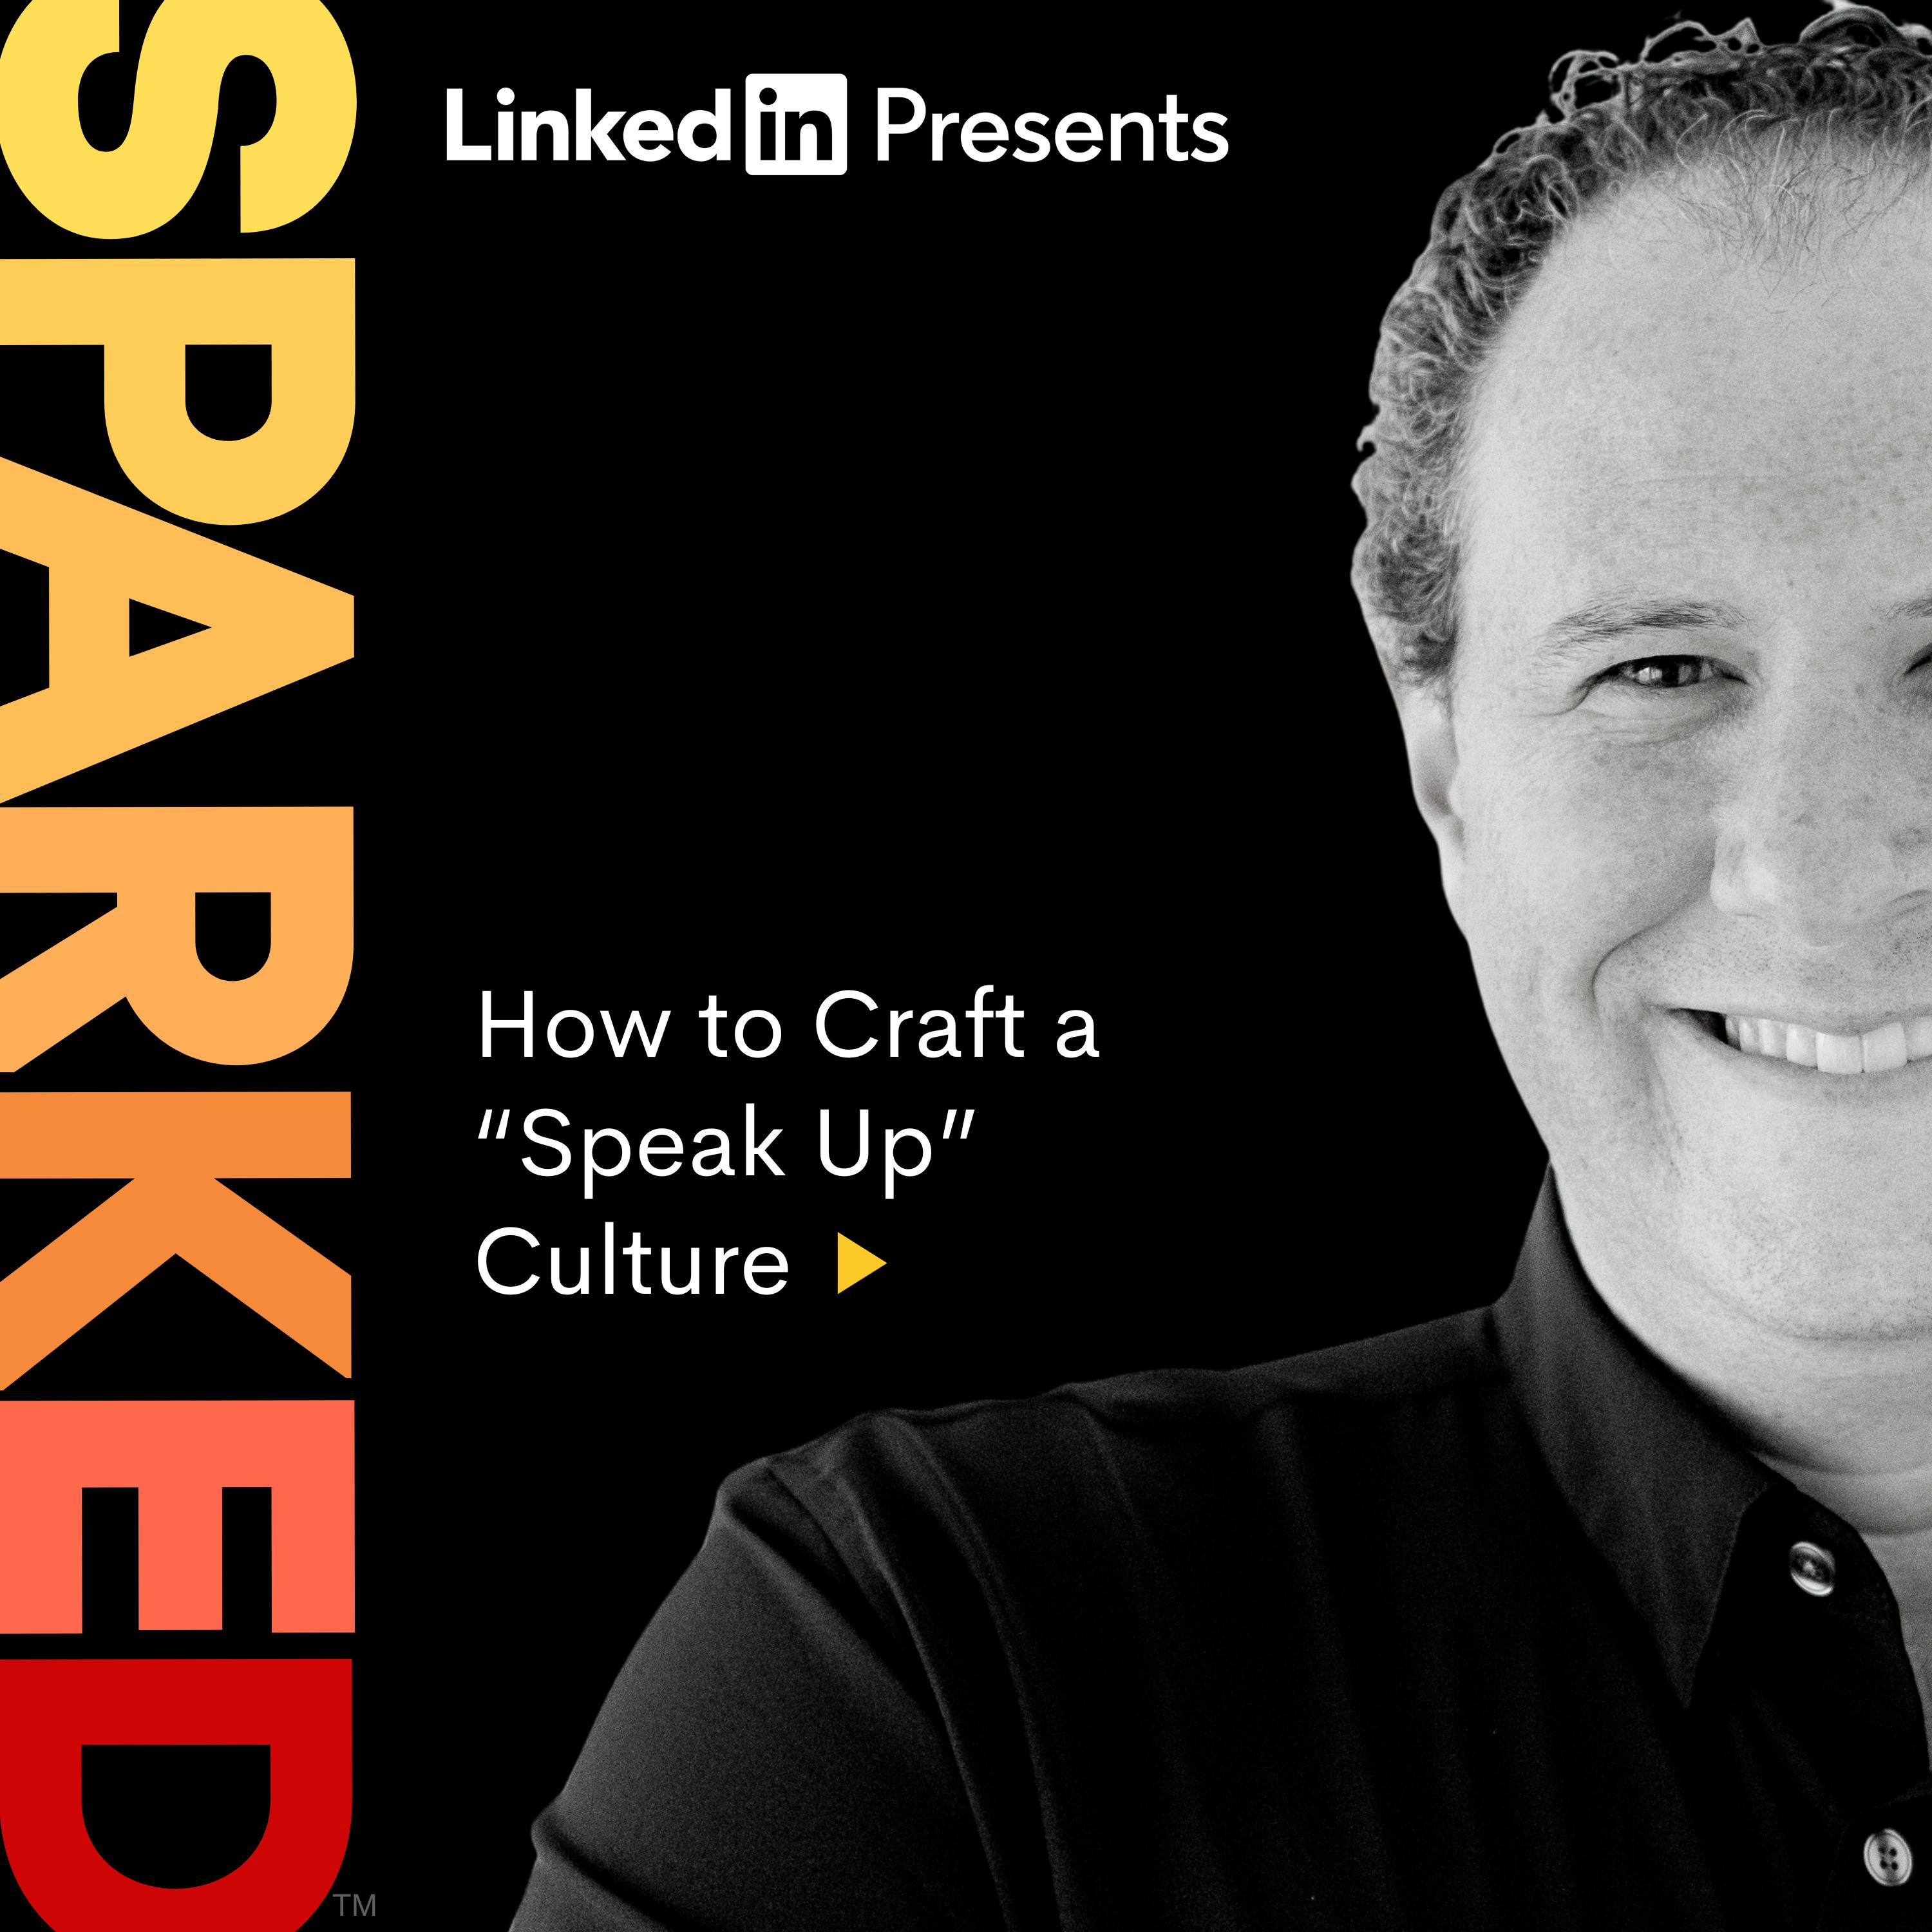 How to Craft a “Speak Up” Culture